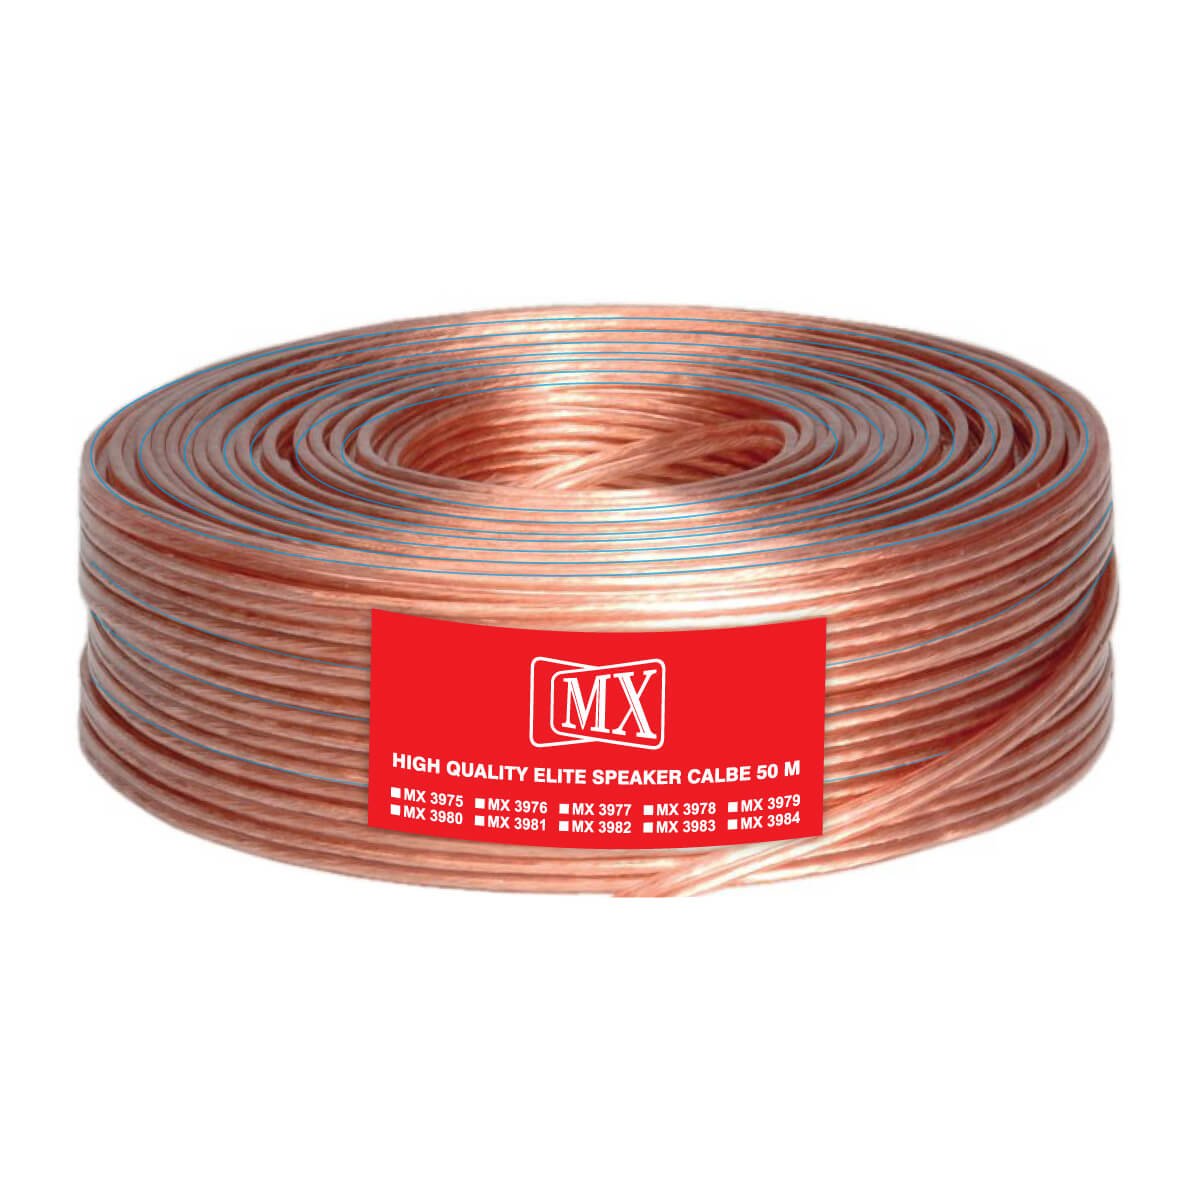 50 Mtr Speaker Cable: 14 Wire: Od - 2.2Mm X 4.4Mm : 50 Mtr Coil, Transparent - GADGET WAGON SPEAKER